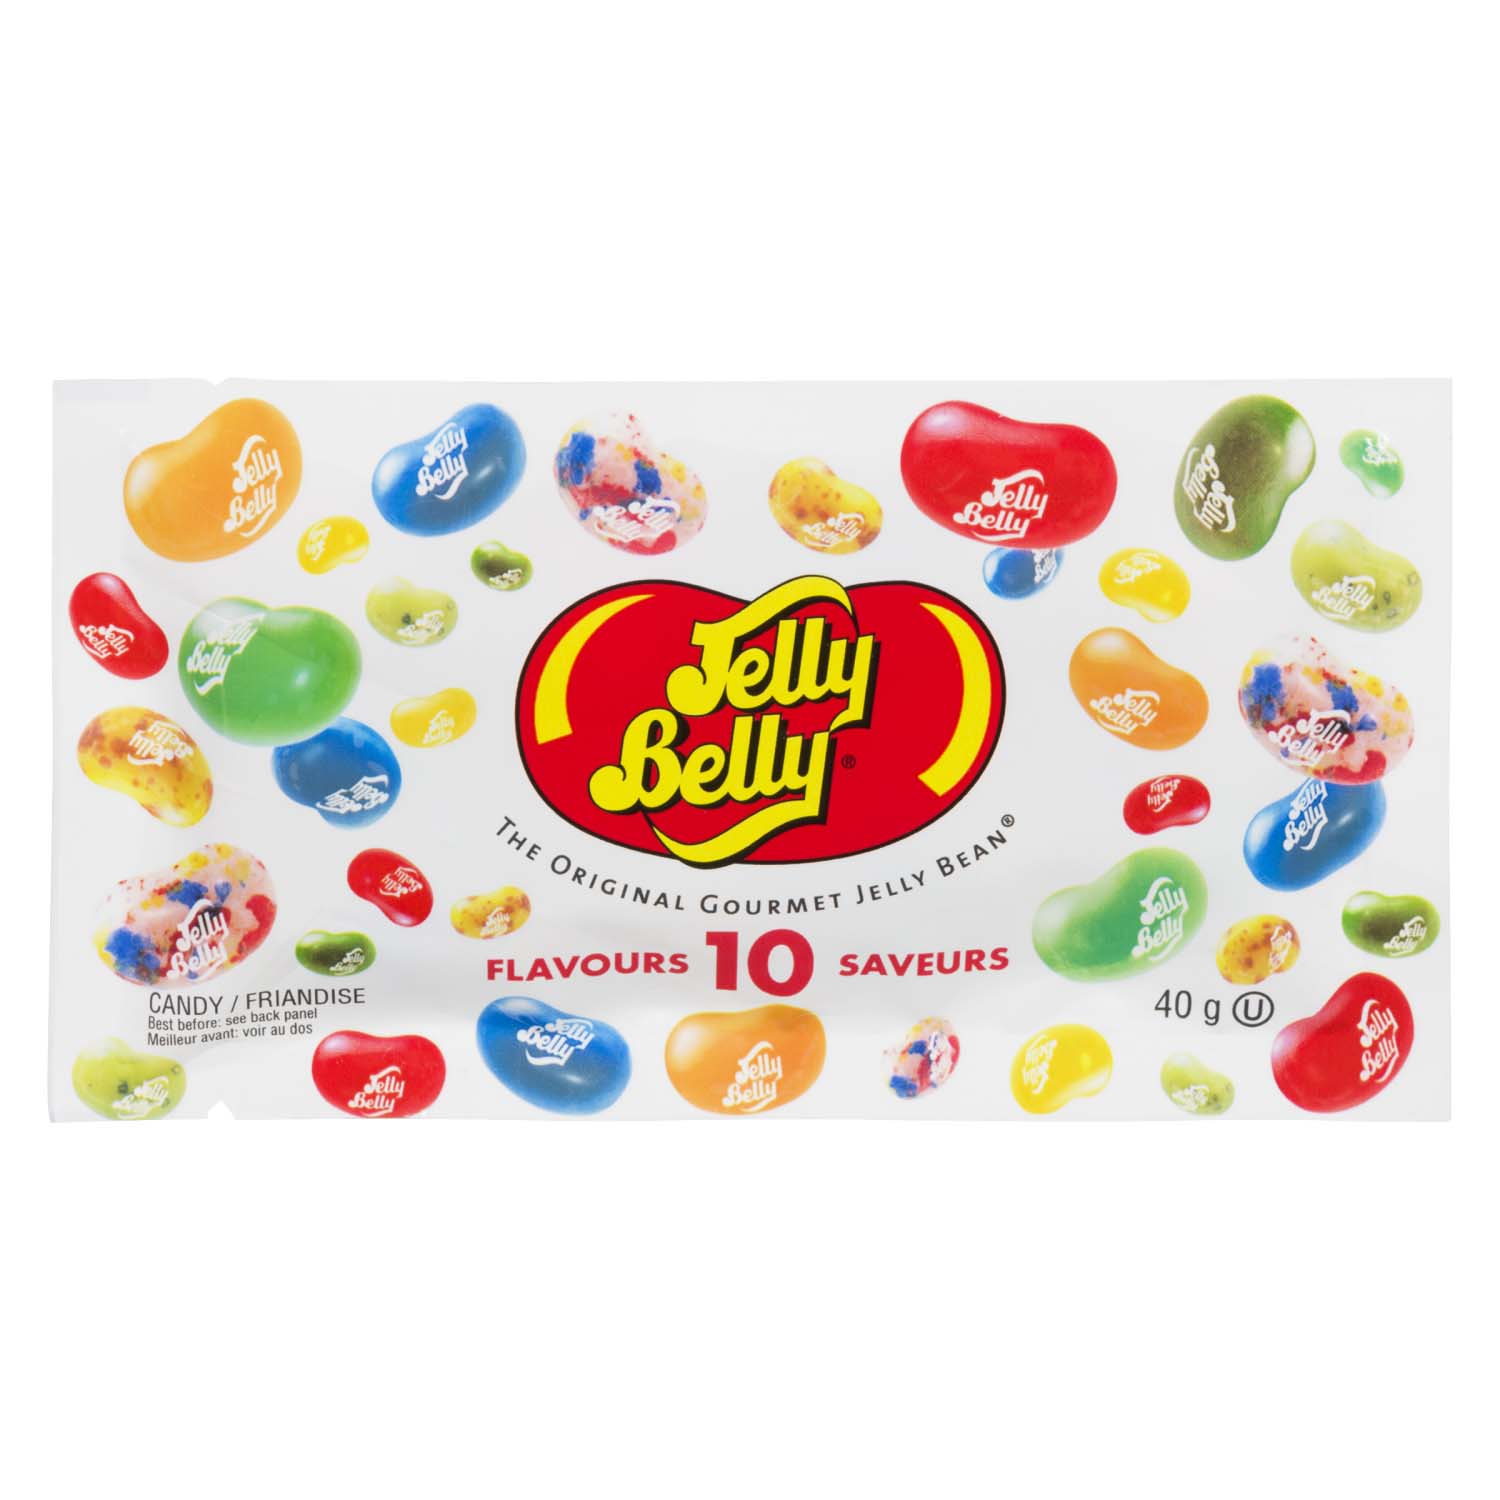 Jelly Belly Candy 10 Flavours 40 G Powells Supermarkets 2640